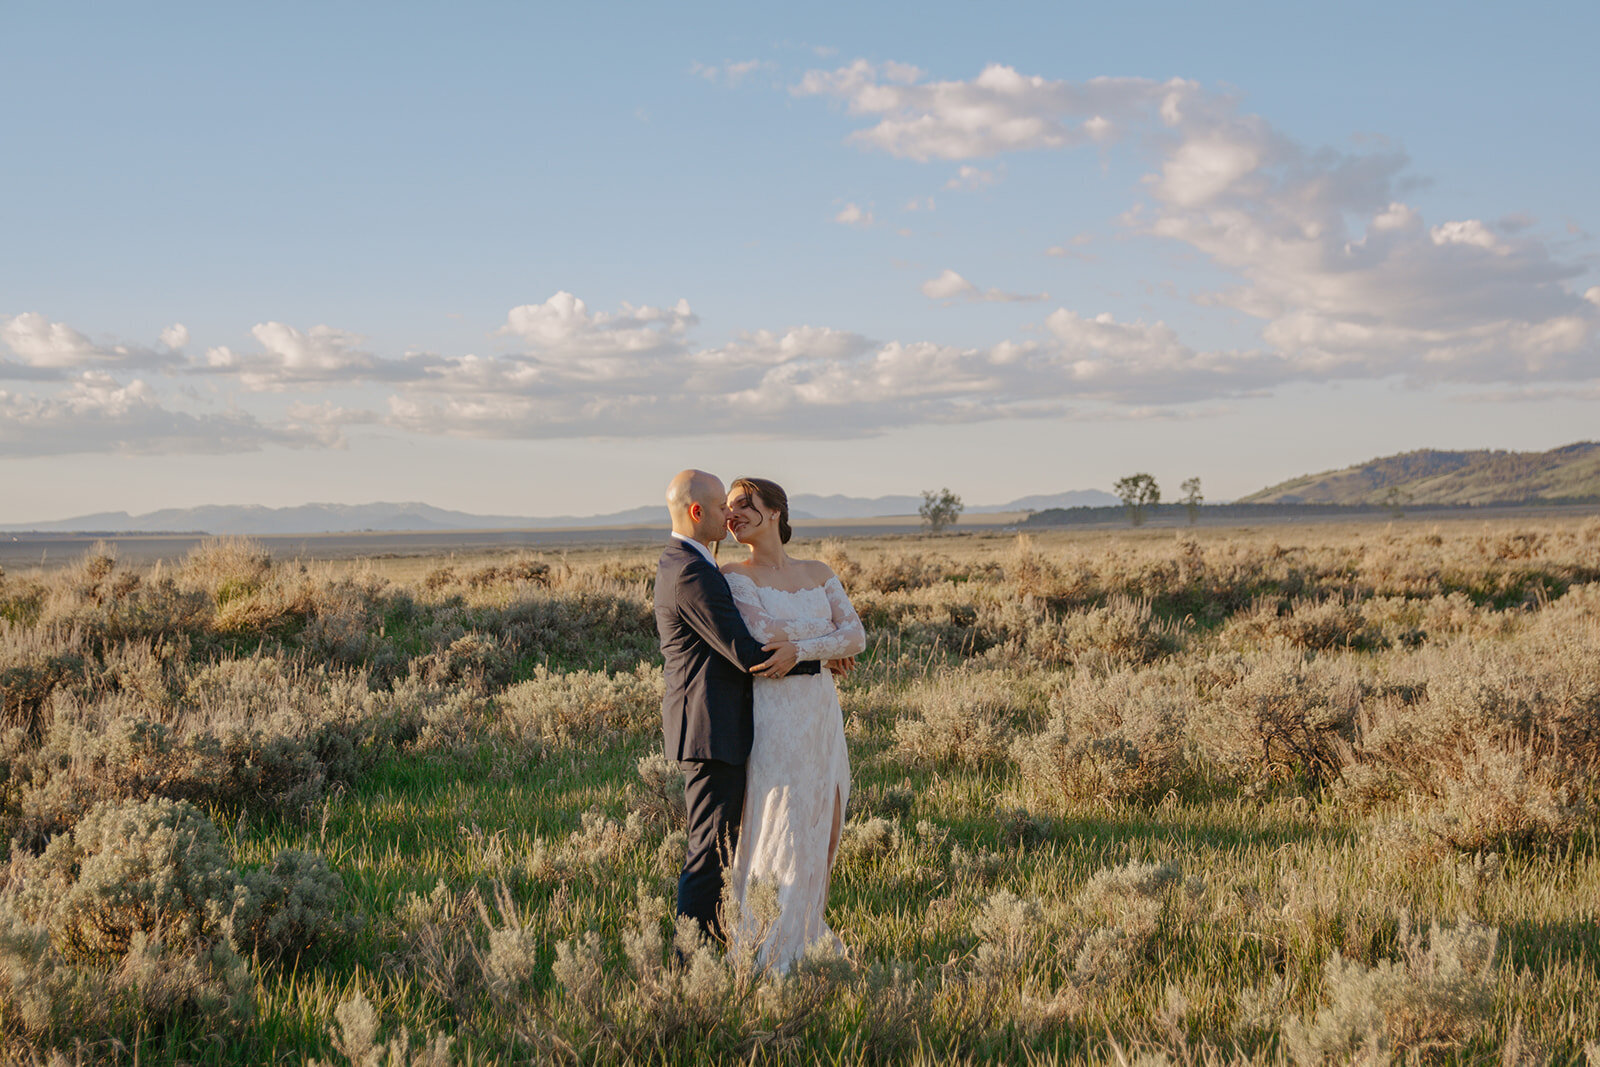 Adventure elopement photos at Moulton barns during sunset after their Jackson Hole, Wyoming, Elopement